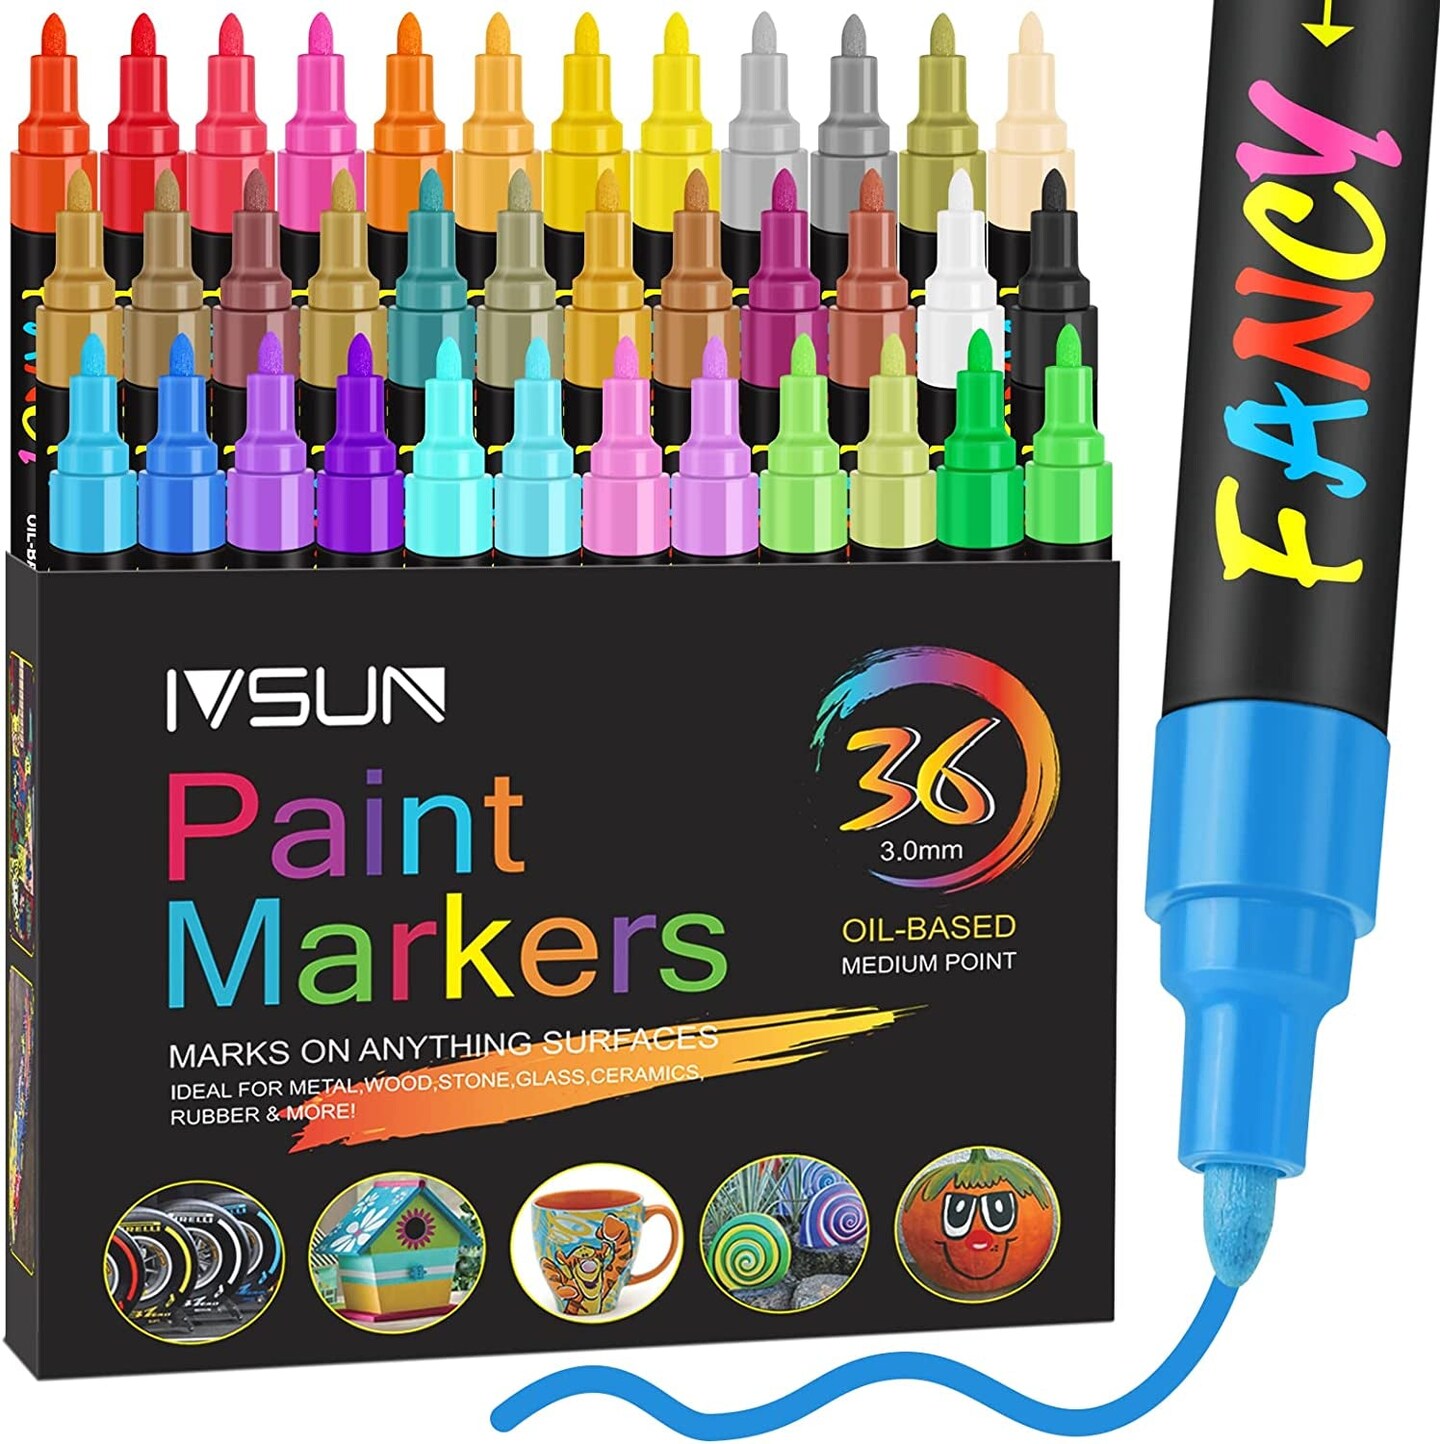 Paint Markers, 20 Colors Oil-Based Waterproof Paint Marker Pen Set, Never  Fade Quick Dry and Permanent, Works on Rocks Painting, Wood, Fabric